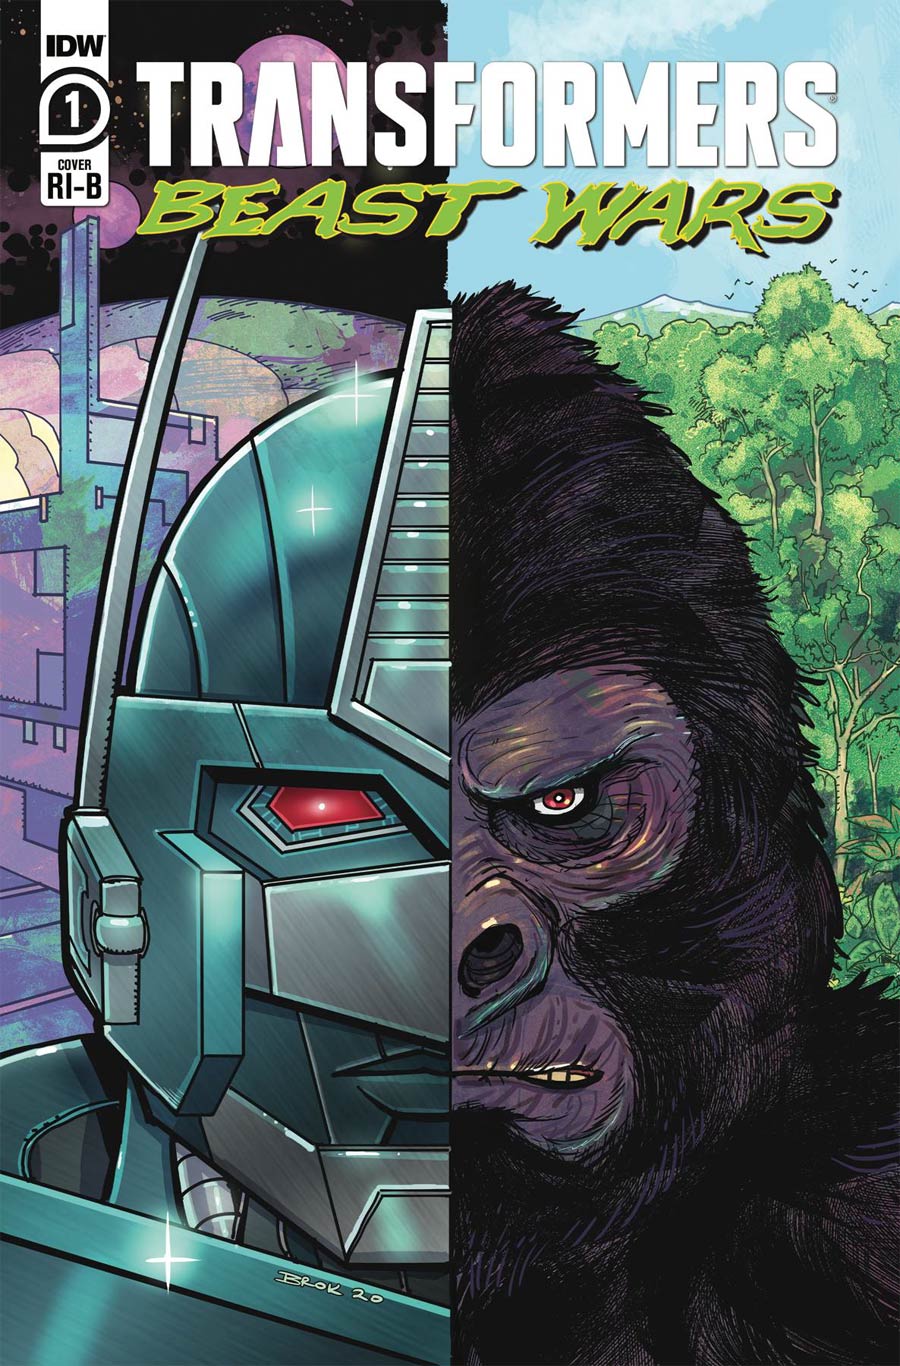 Transformers Beast Wars Vol 2 #1 Cover D Incentive Nick Brokenshire Variant Cover